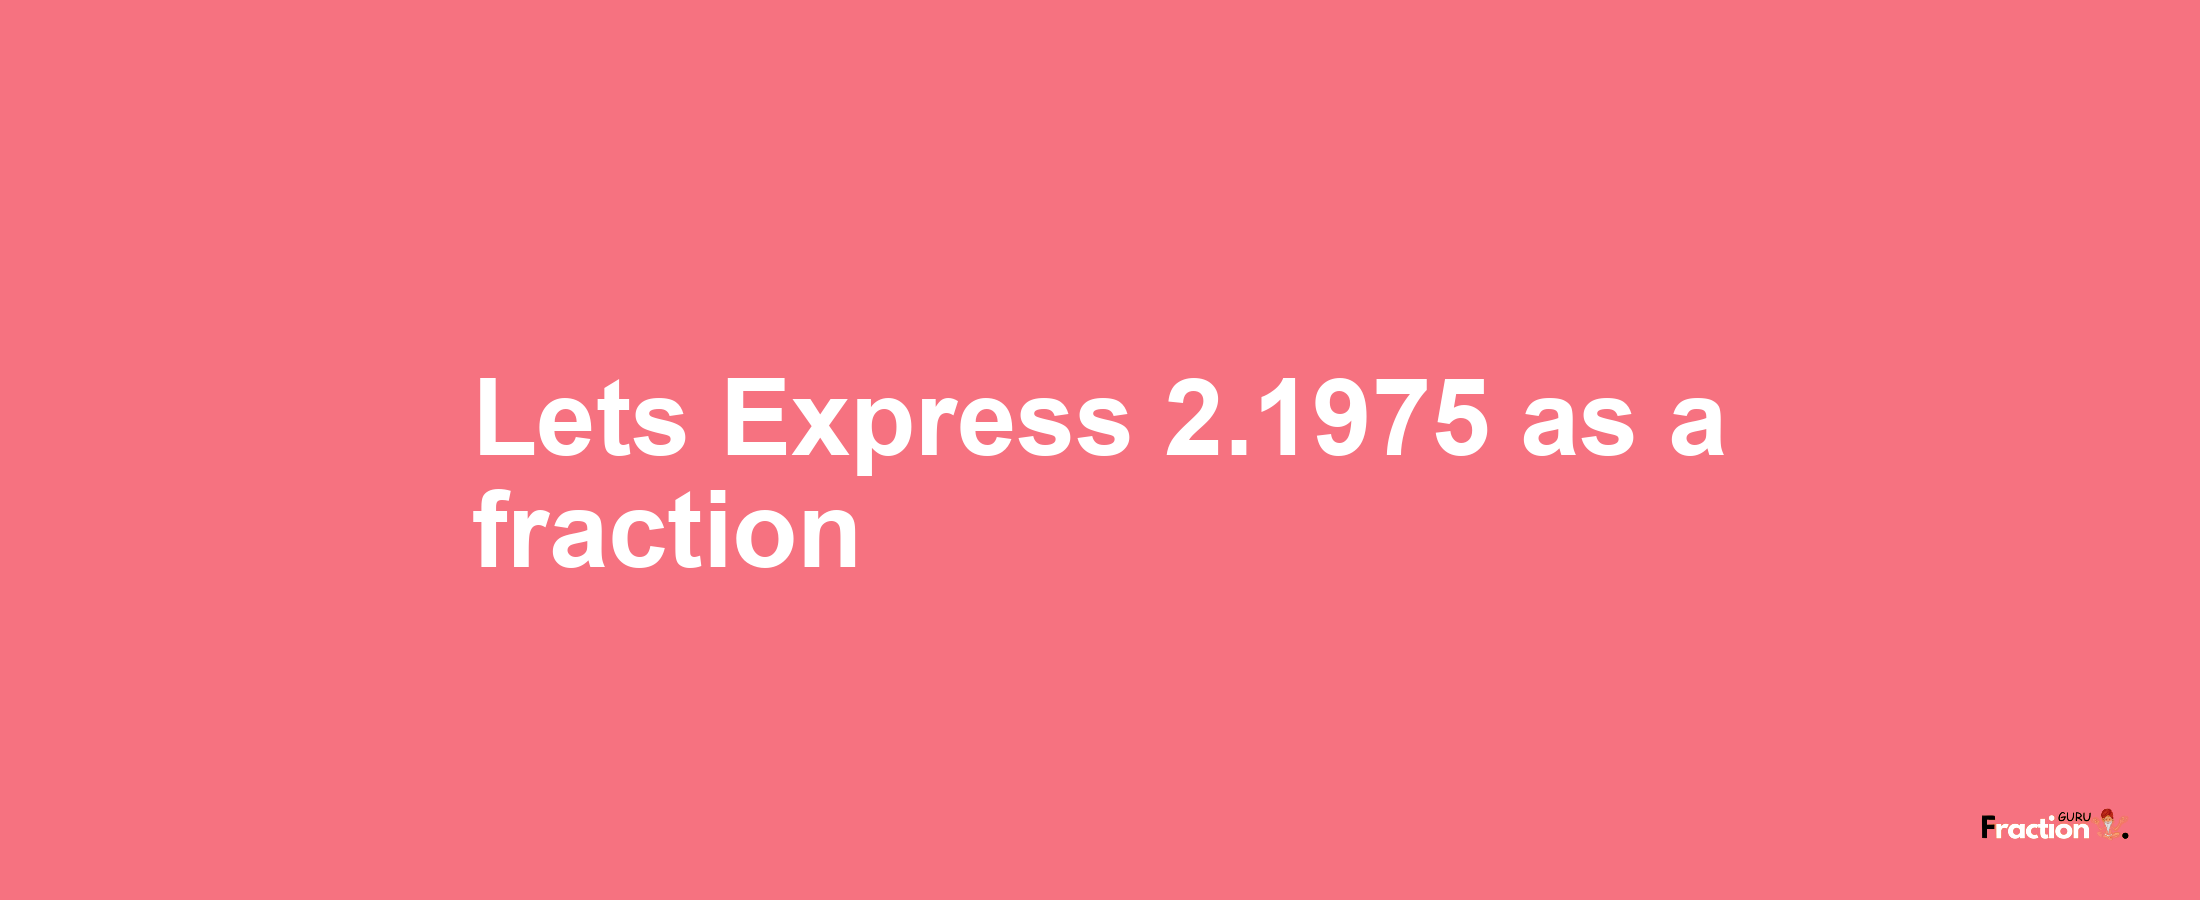 Lets Express 2.1975 as afraction